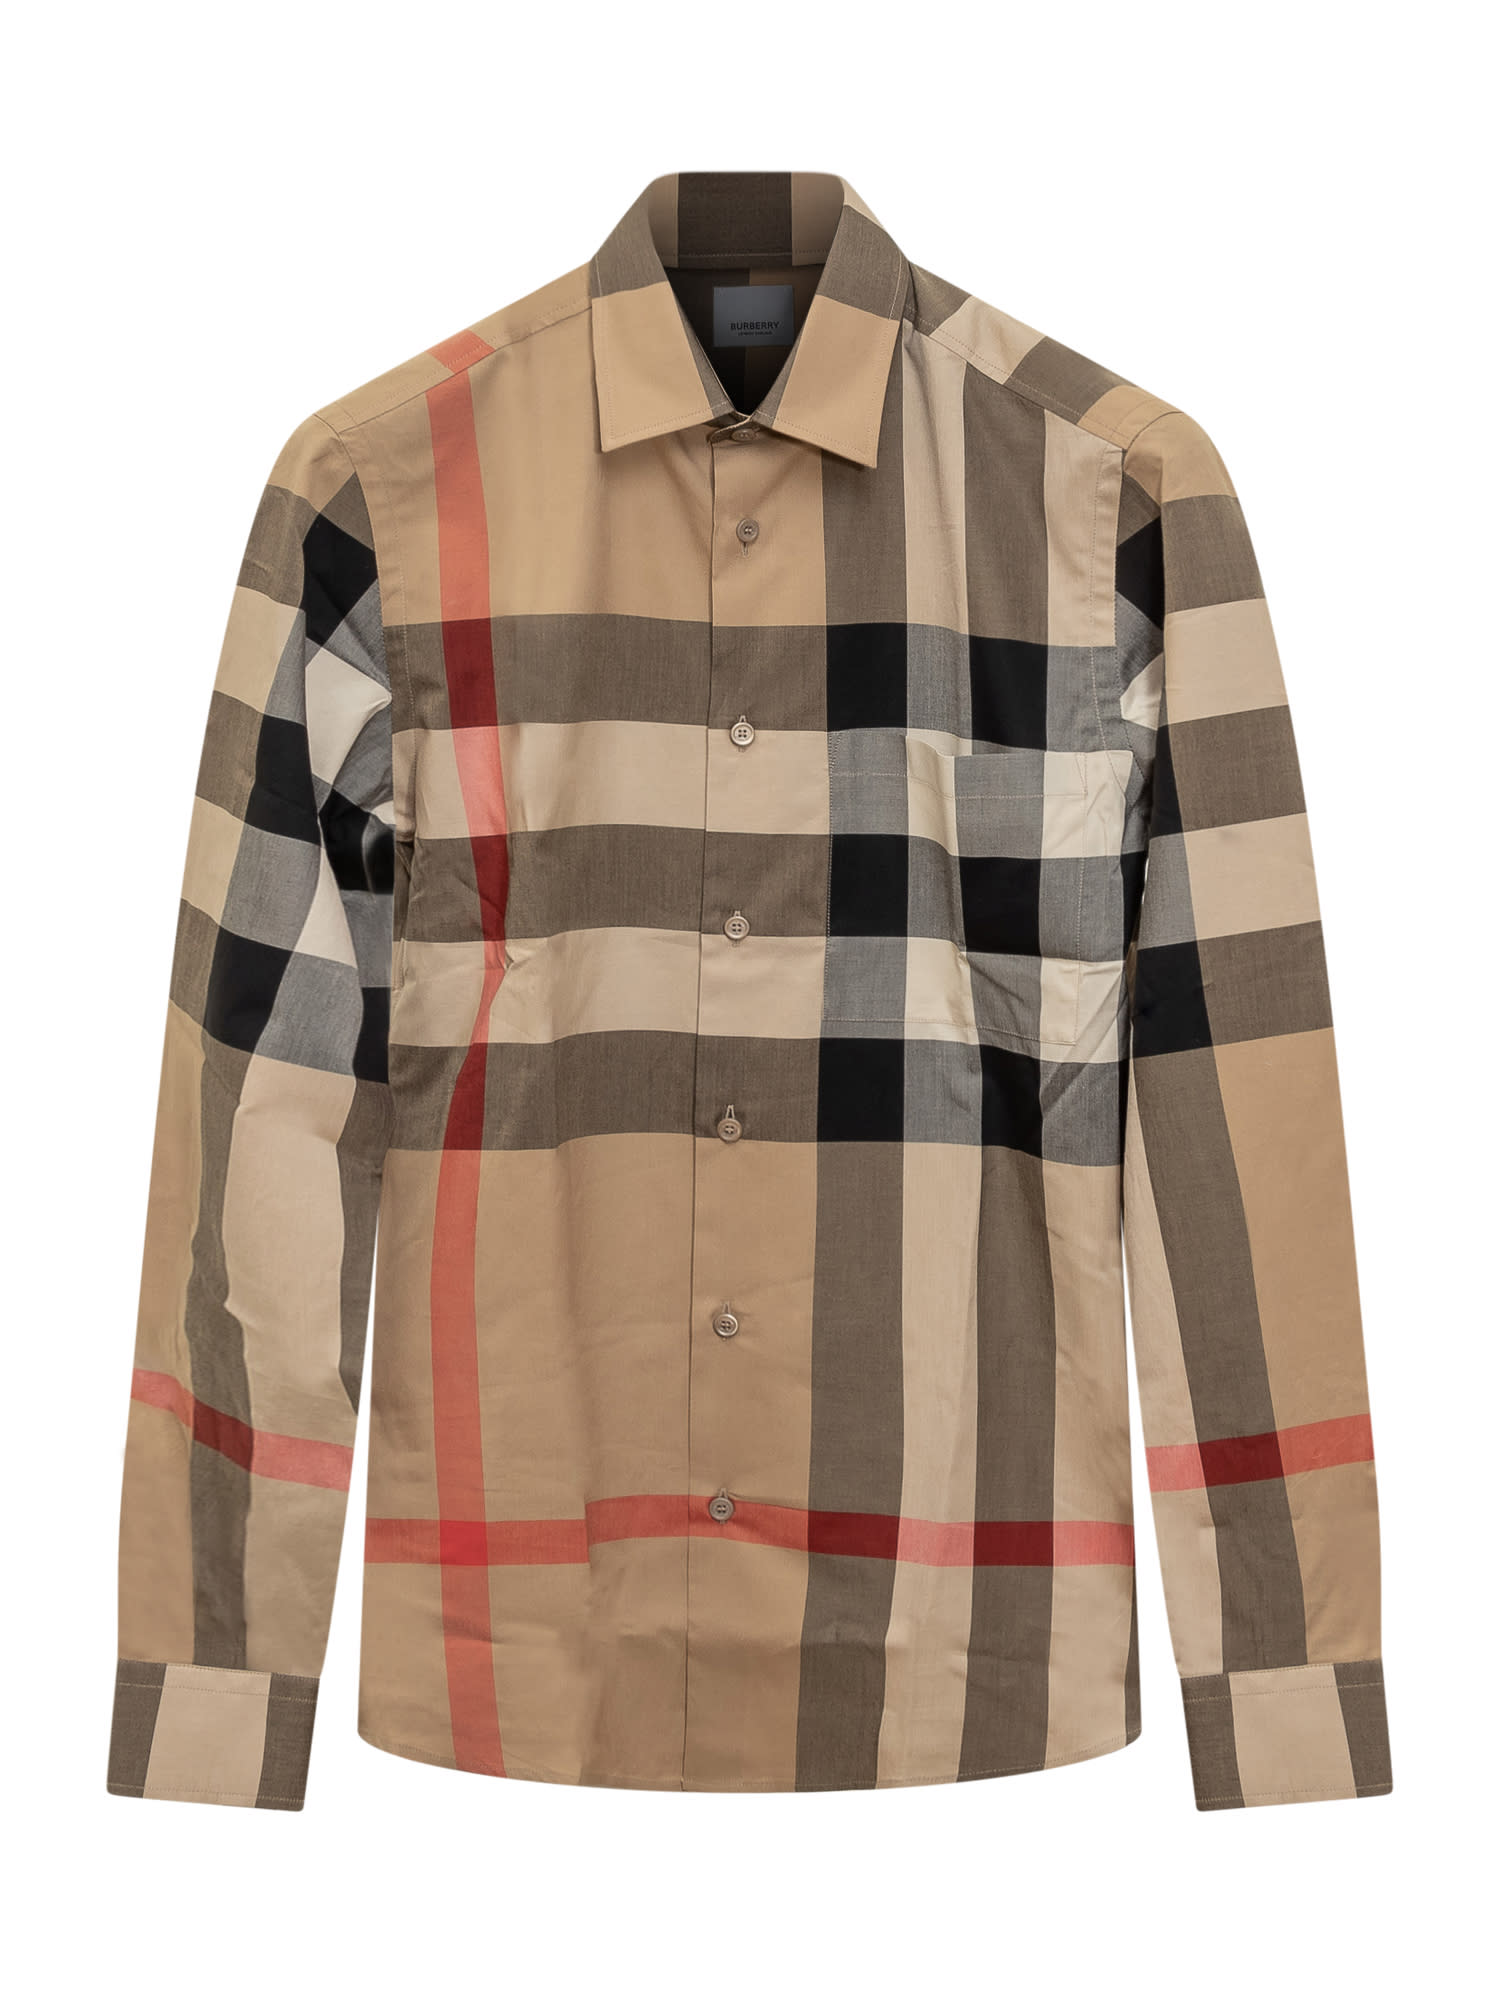 Burberry Shirt In A7028